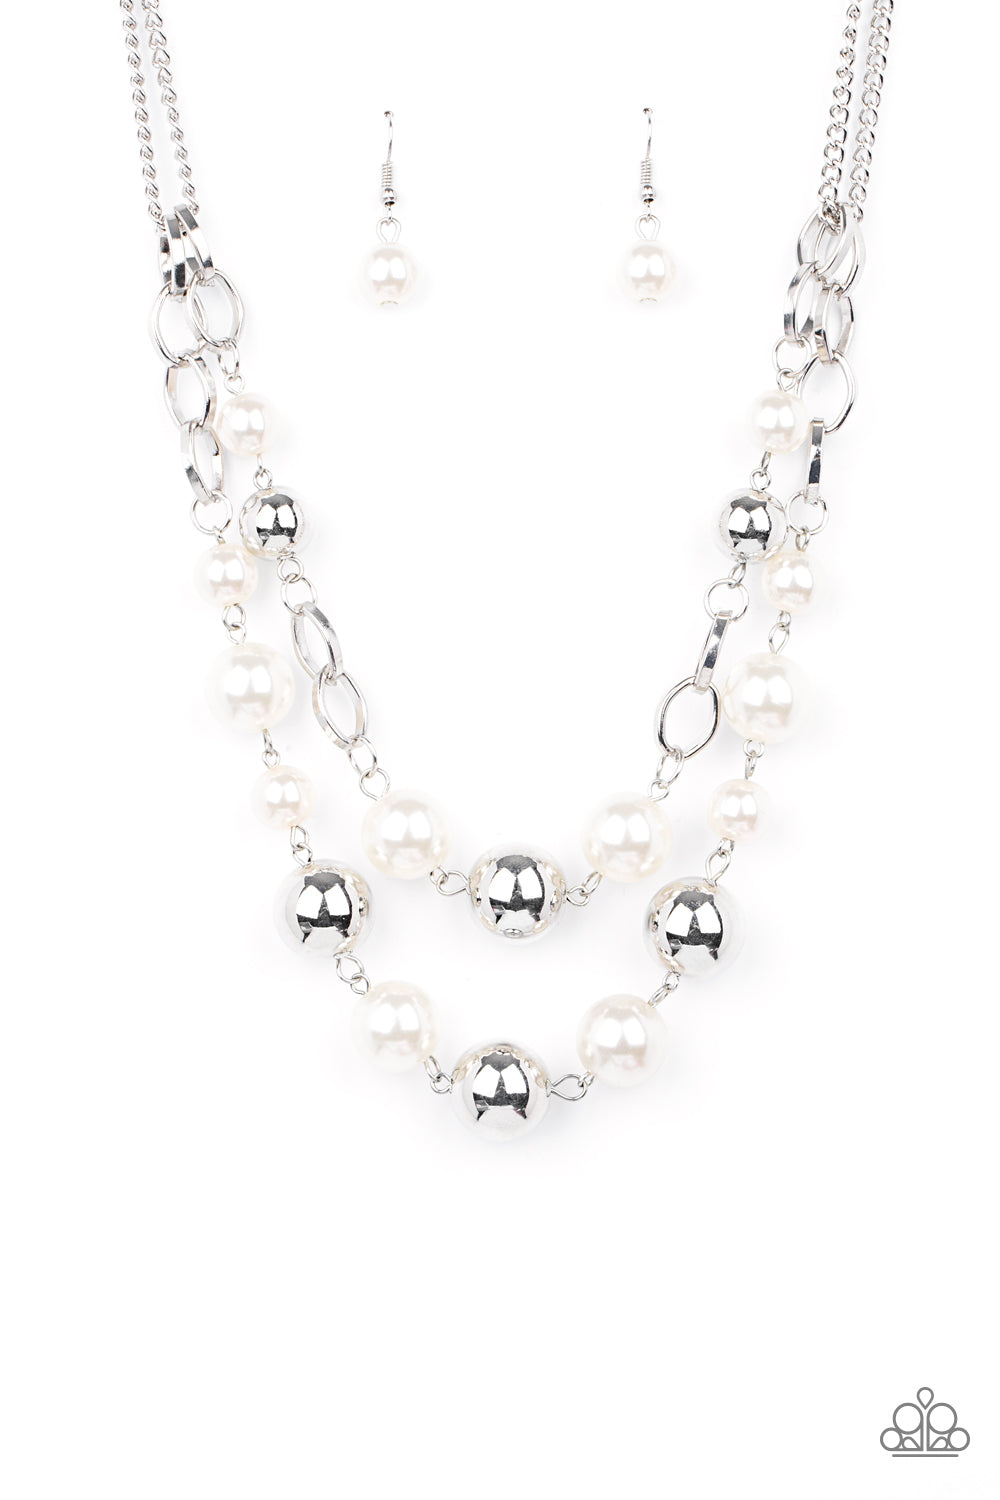 Sections of oversized silver chains, white pearls, and shiny silver beads haphazardly link into two timeless layers below the collar, creating a dramatically refined display. Features an adjustable clasp closure.